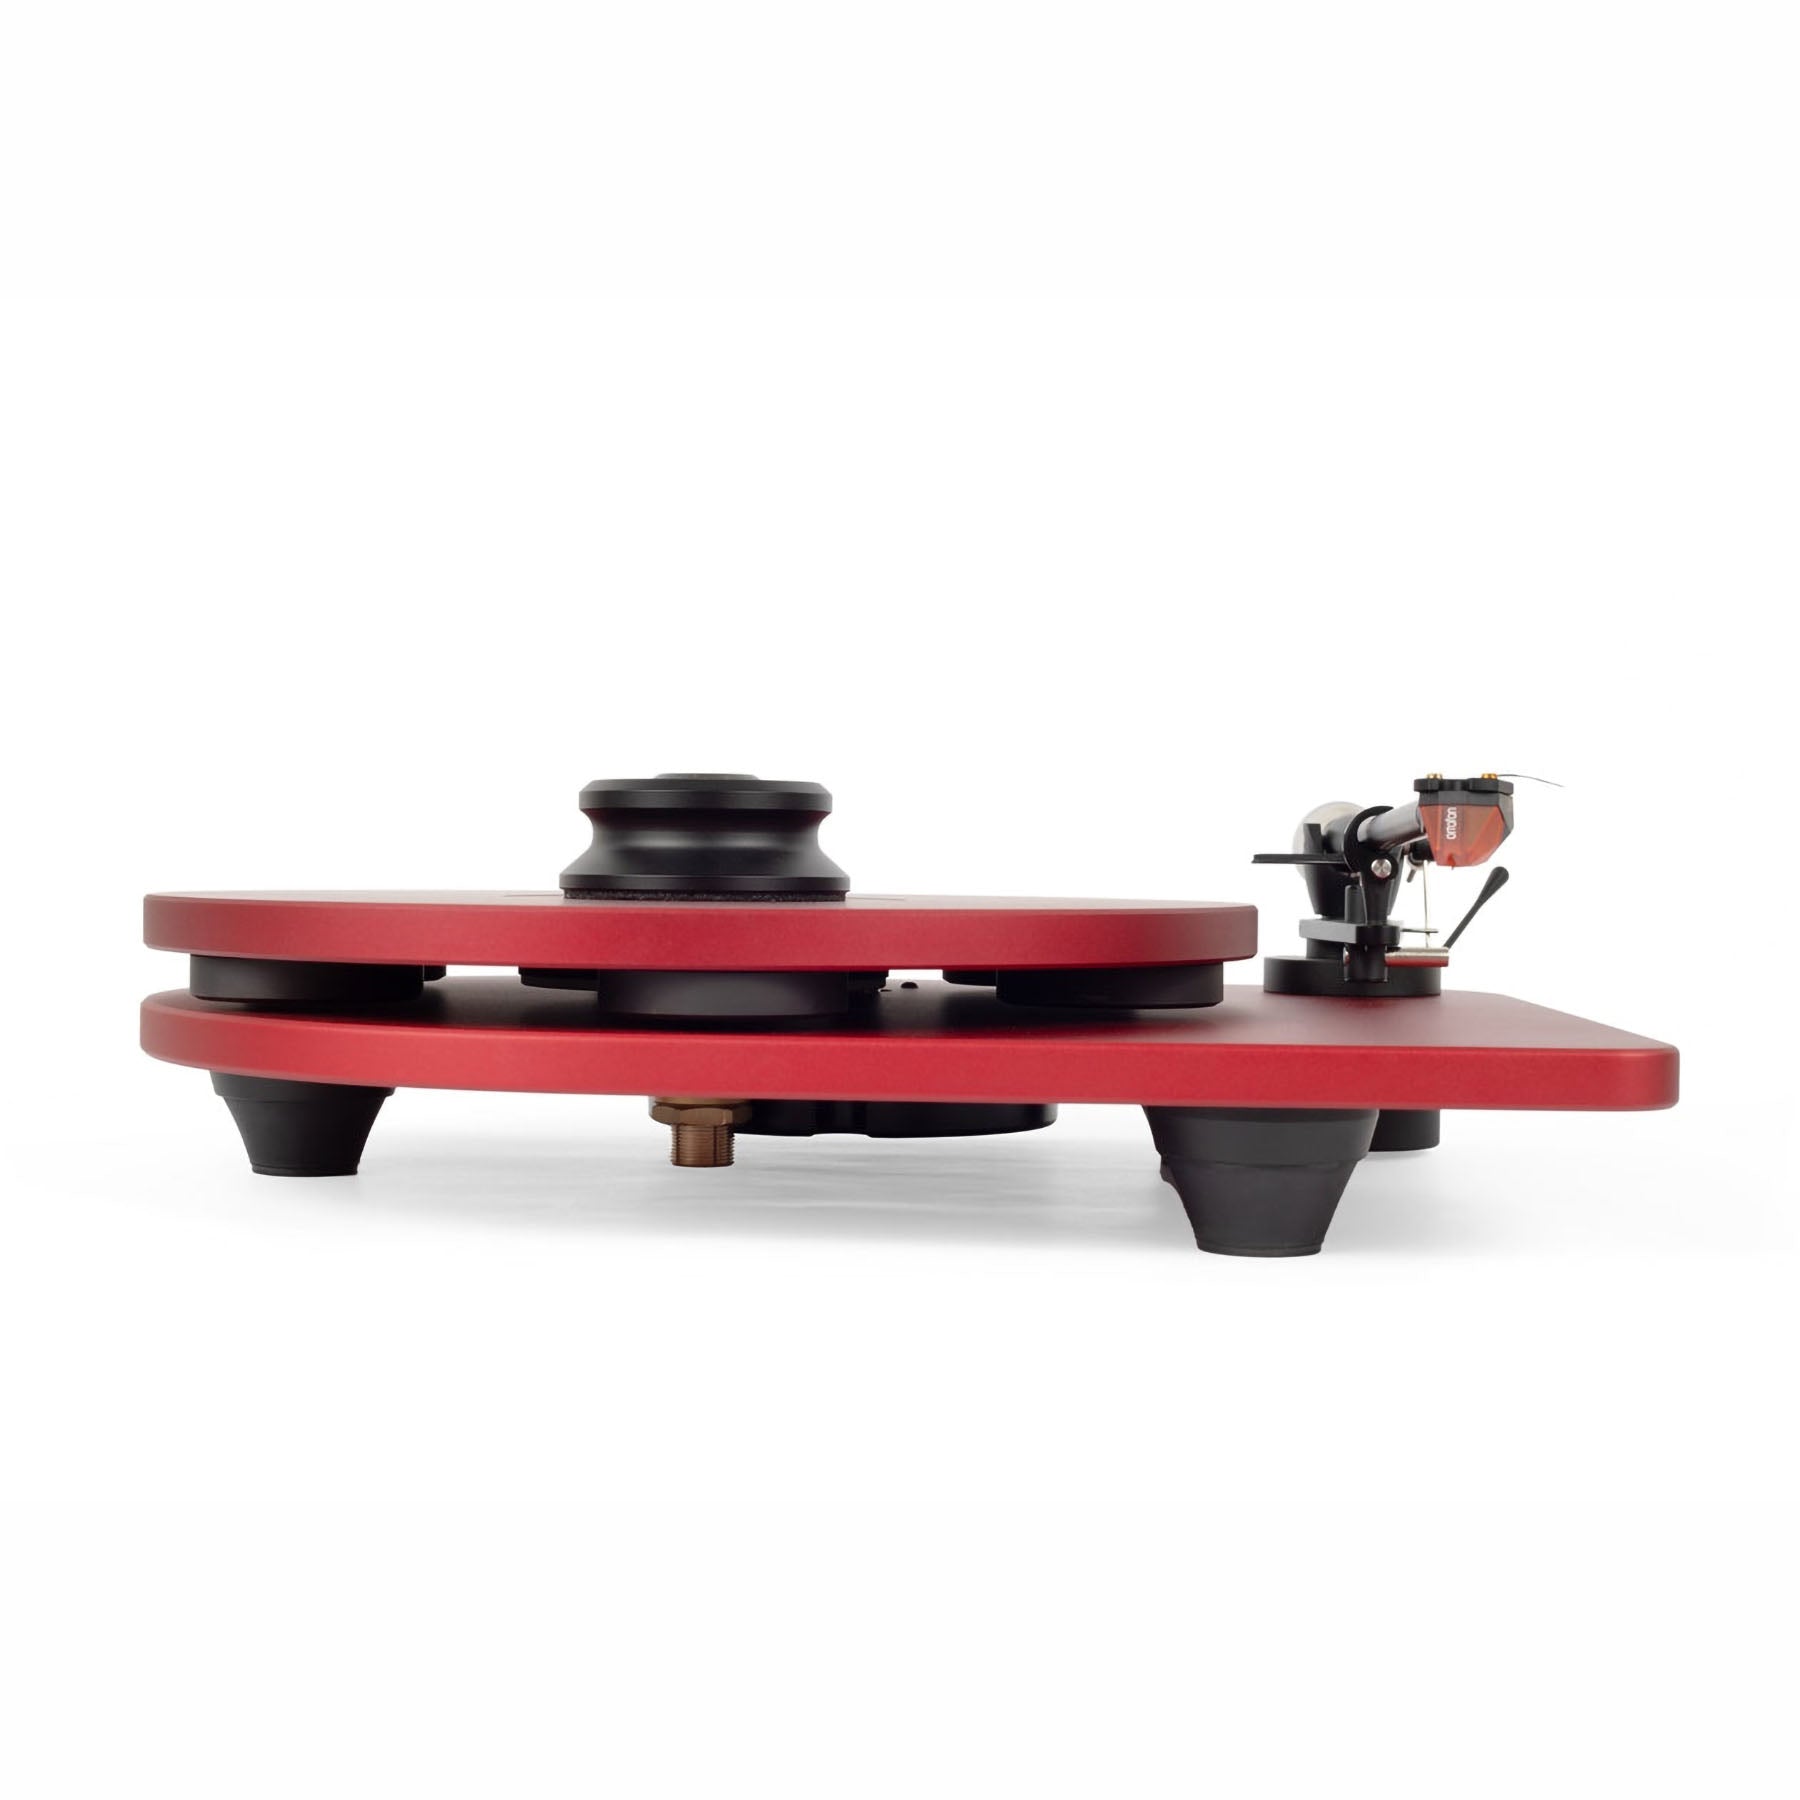 AURIS Bayadere 1 Turntable with W9 Tonearm